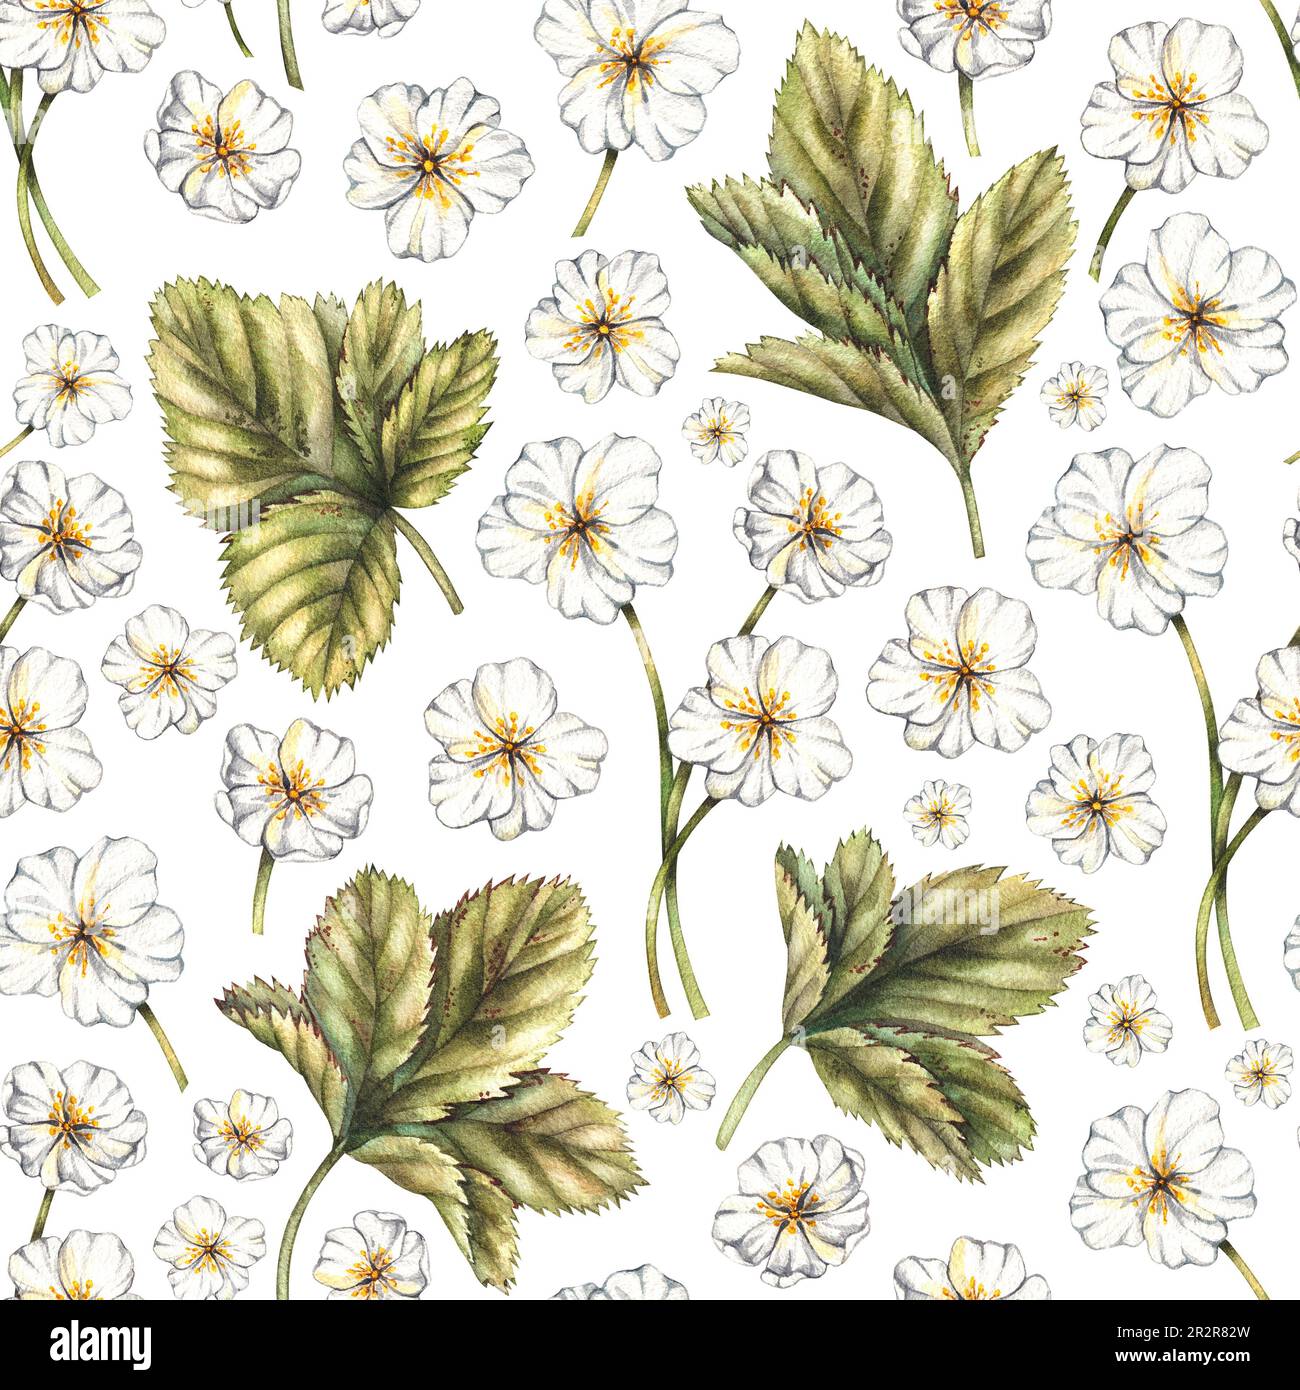 Cloudberry flower and leaf pattern on white. Watercolor pattern for fabric design, textiles, packaging, postcards, invitations Stock Photo